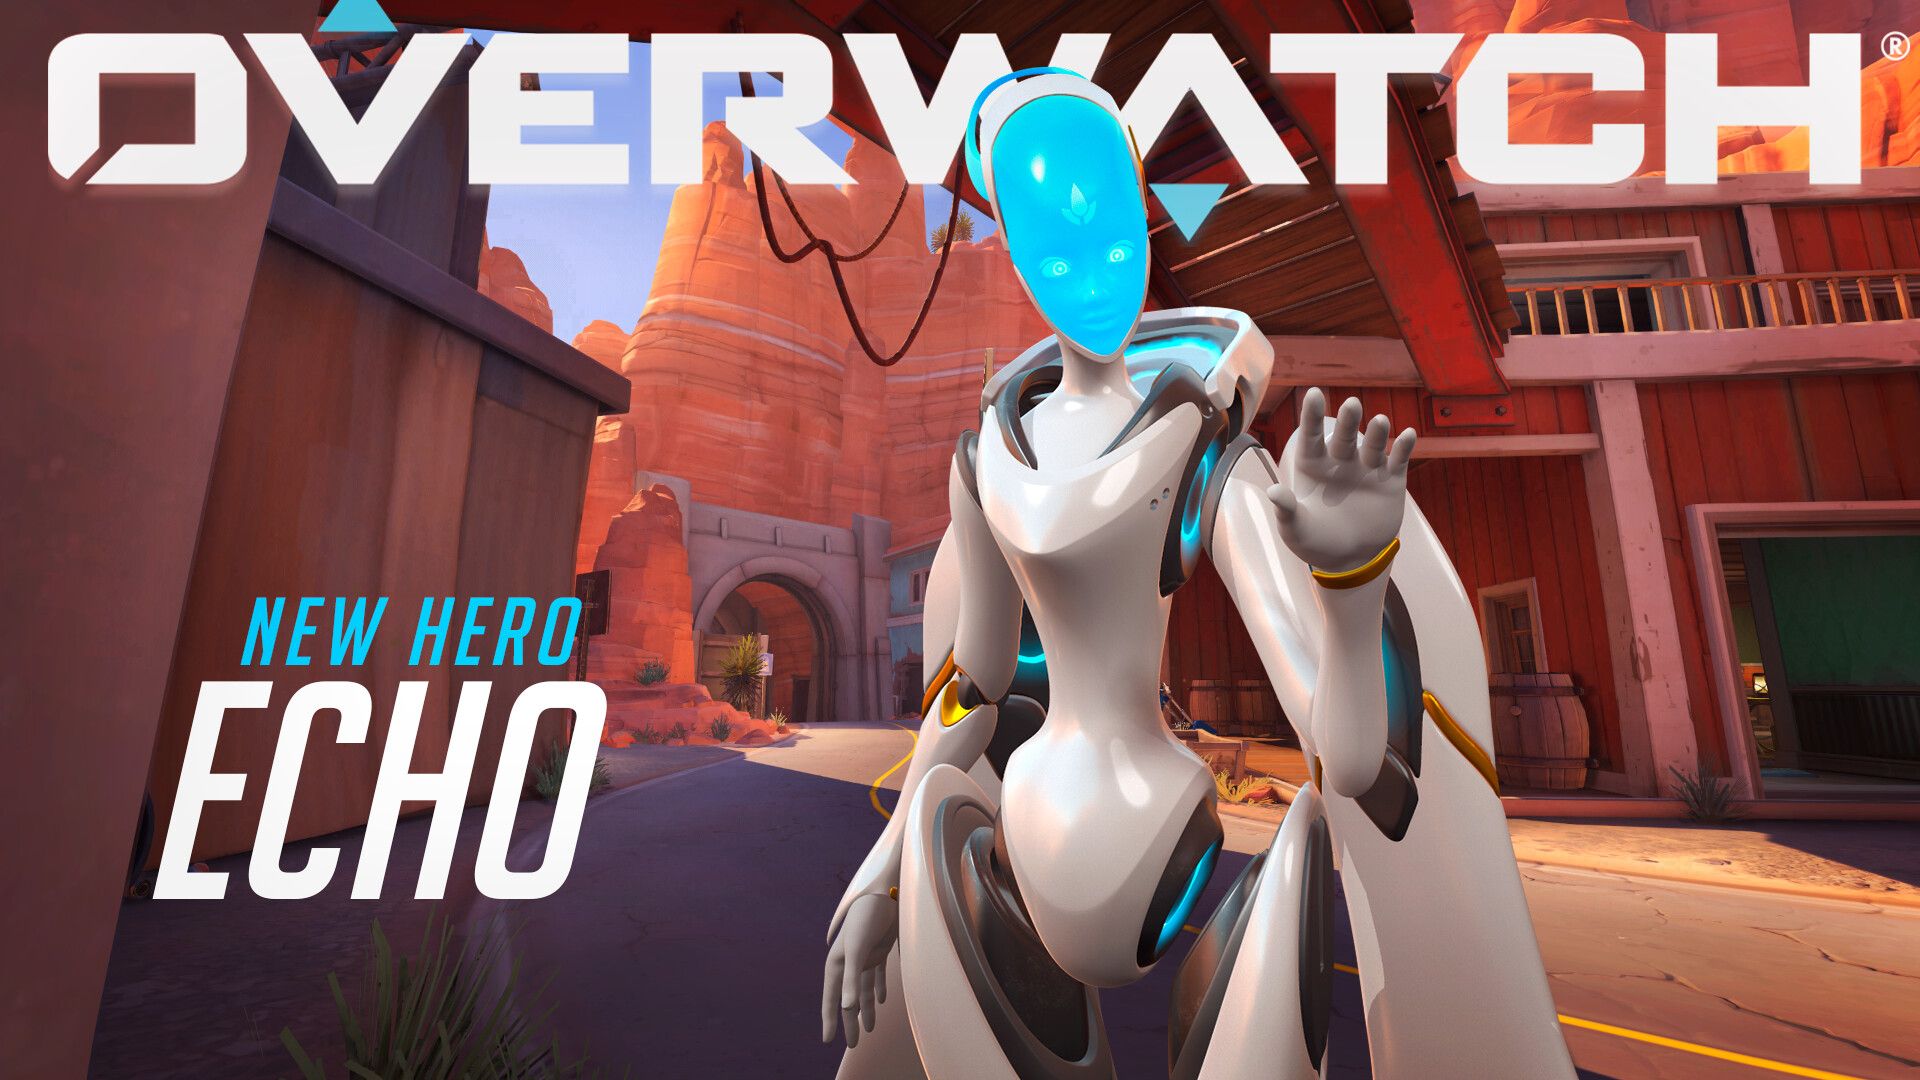 Echo Is Live In Overwatch's New Update, Marking The Final New Character Until Overwatch 2